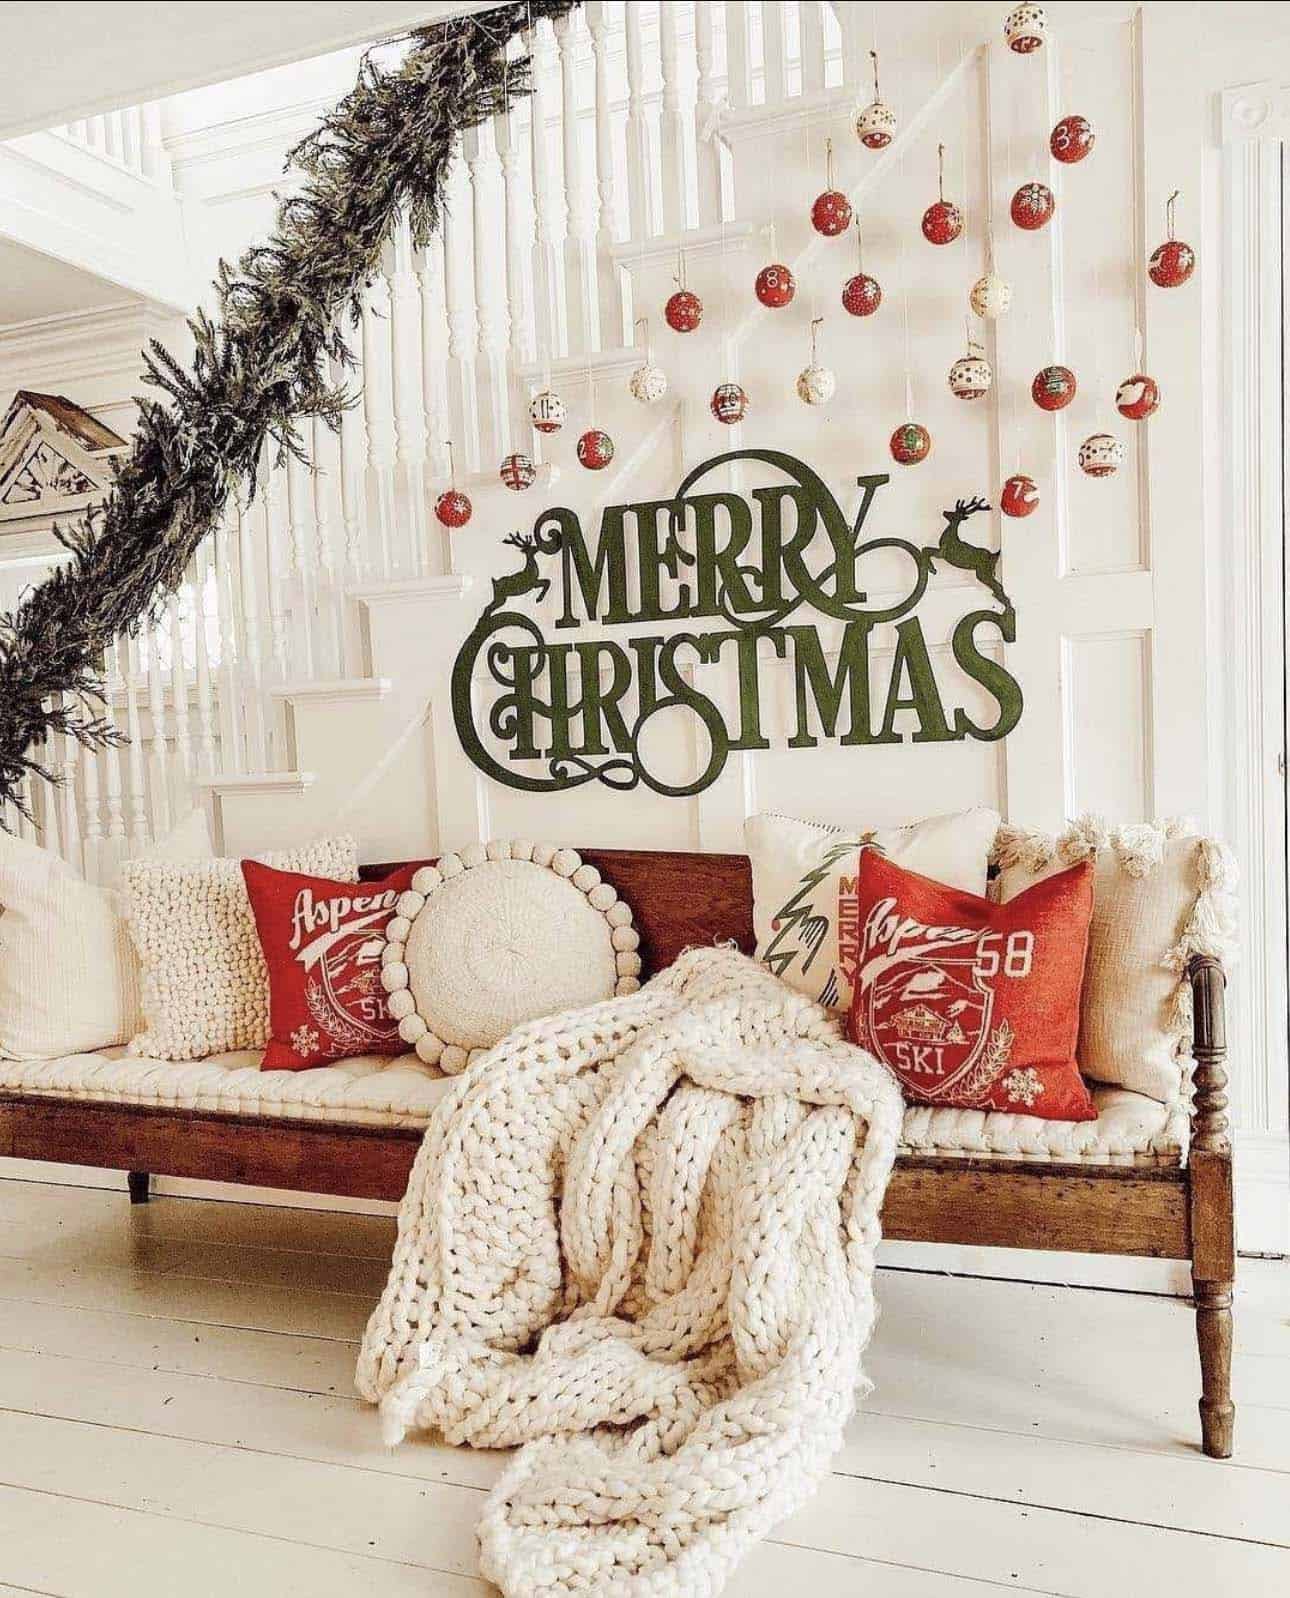 diy-stringed-ornaments-on-the-staircase-with-garland-christmas